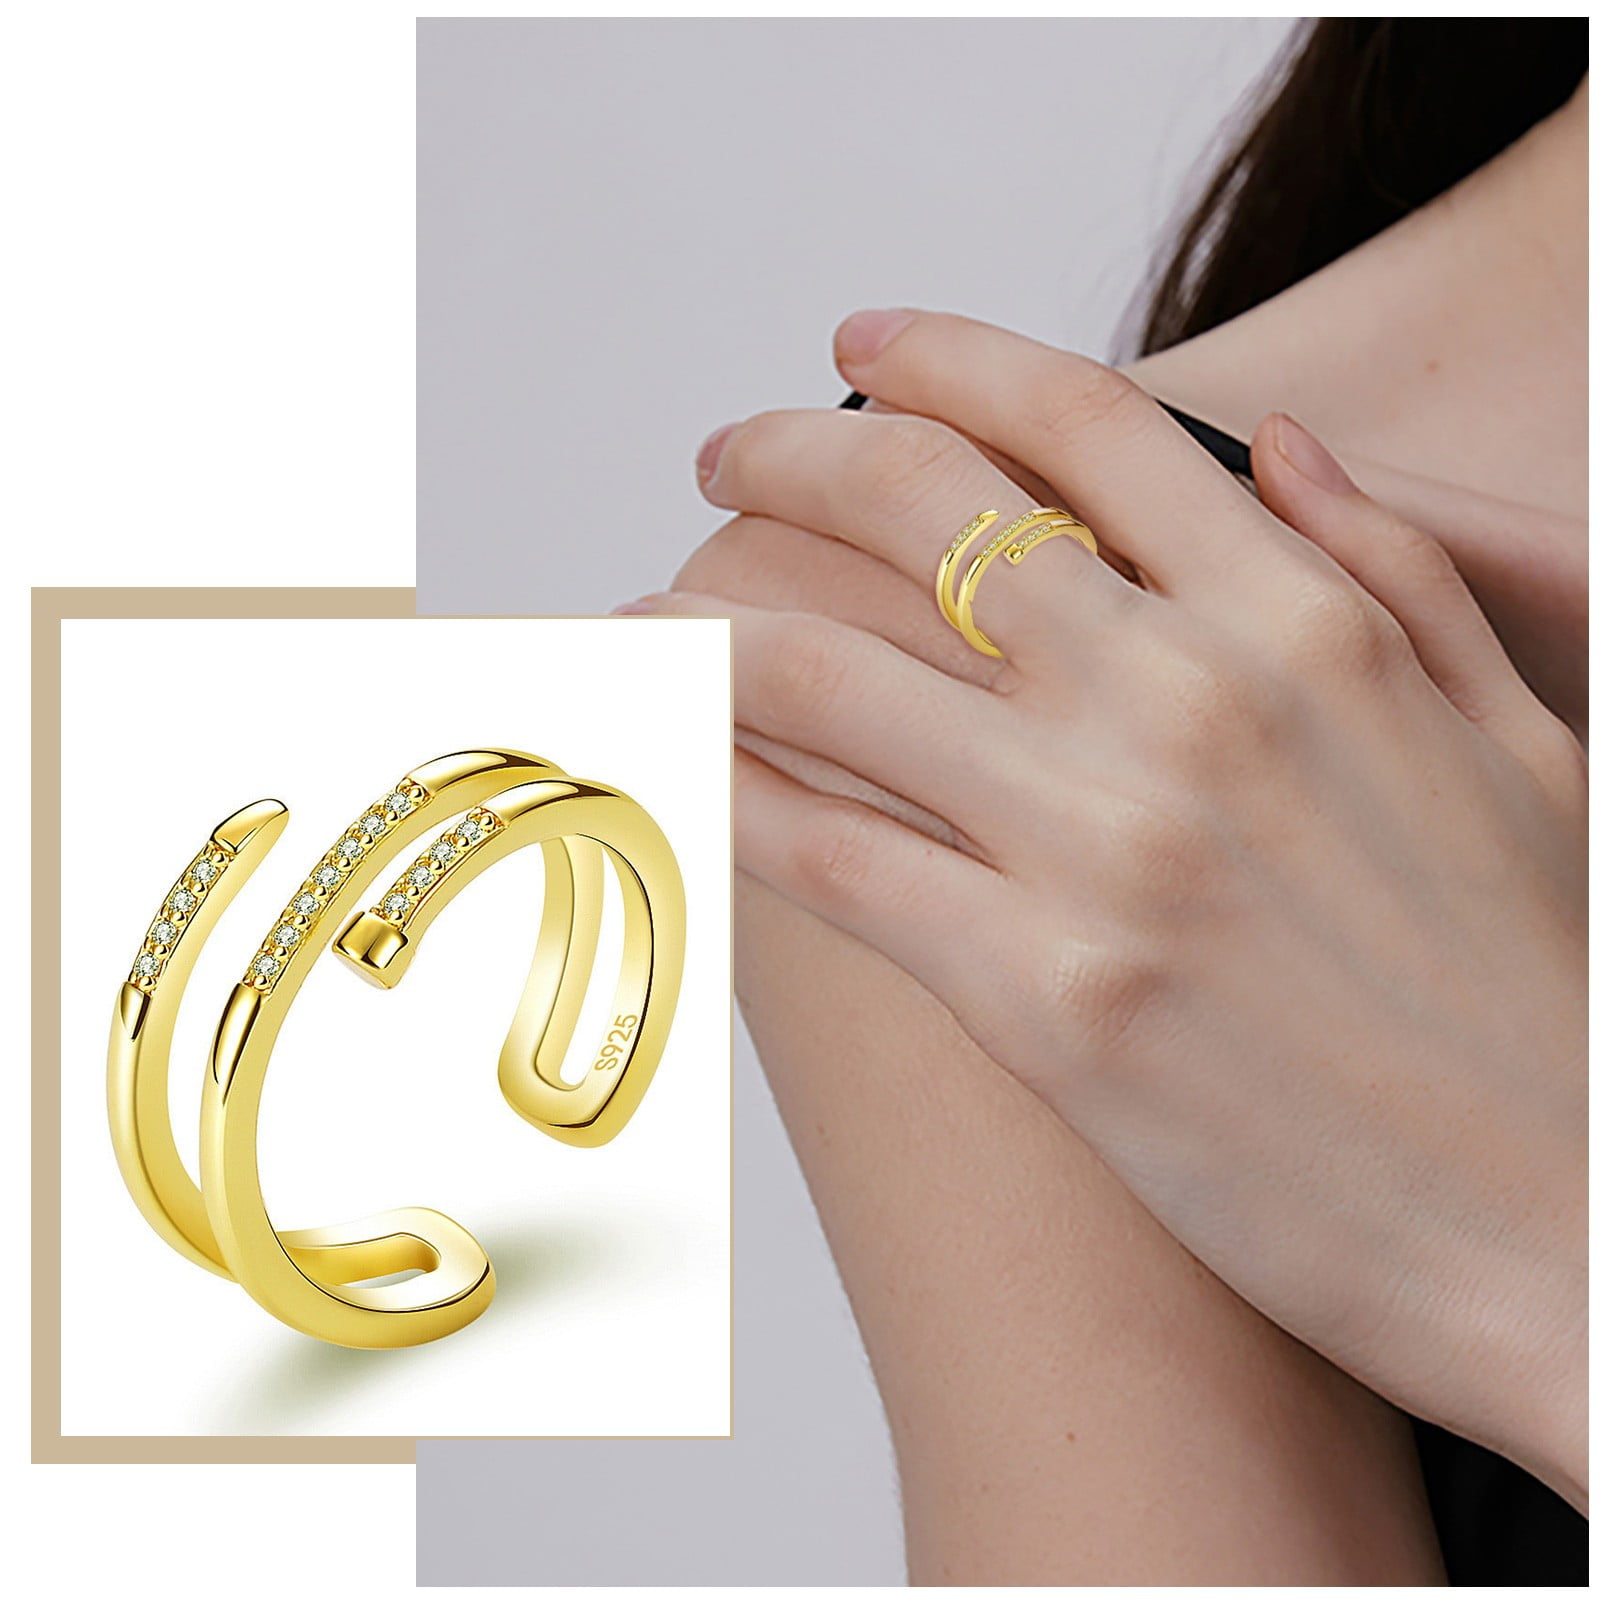 Gold Rings Designs 2022 | Light Weight Gold Rings Designs 2022 | New  Pattern Gold Rings Designs | Gold ring designs, Ring designs, Long ring